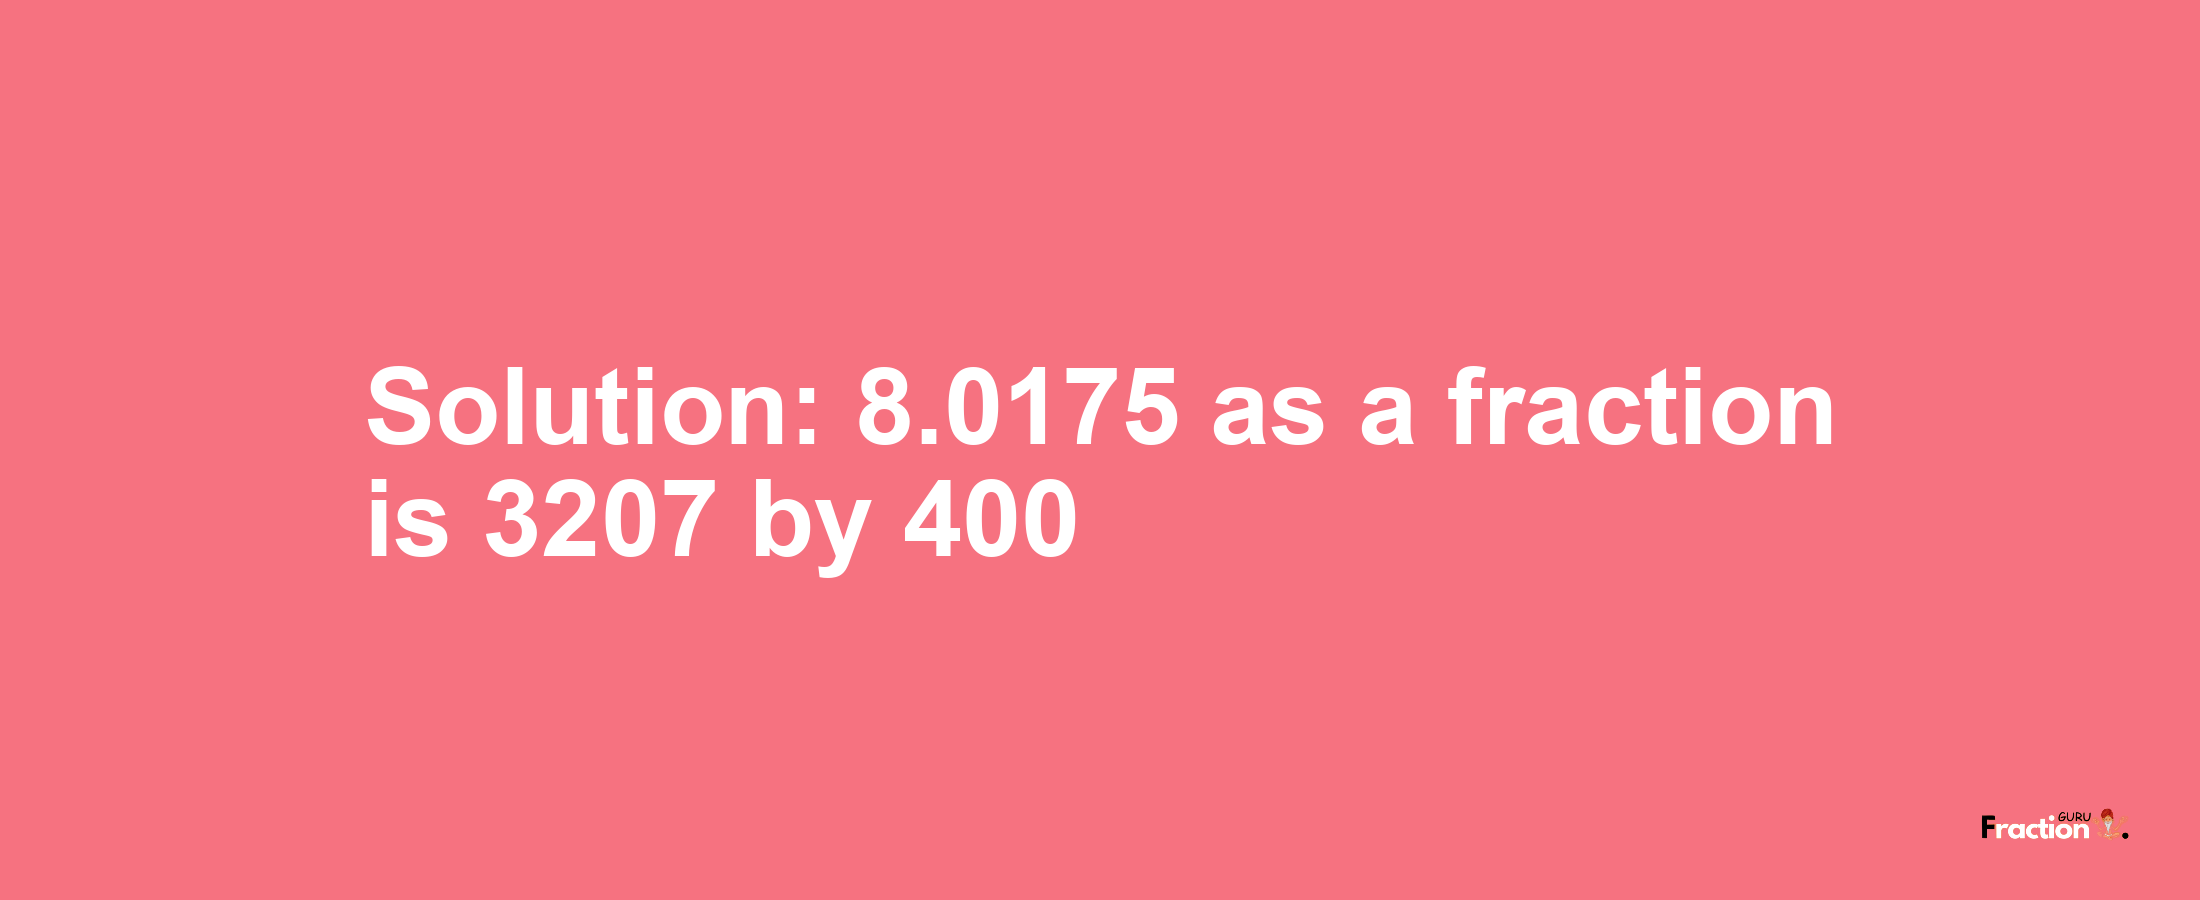 Solution:8.0175 as a fraction is 3207/400